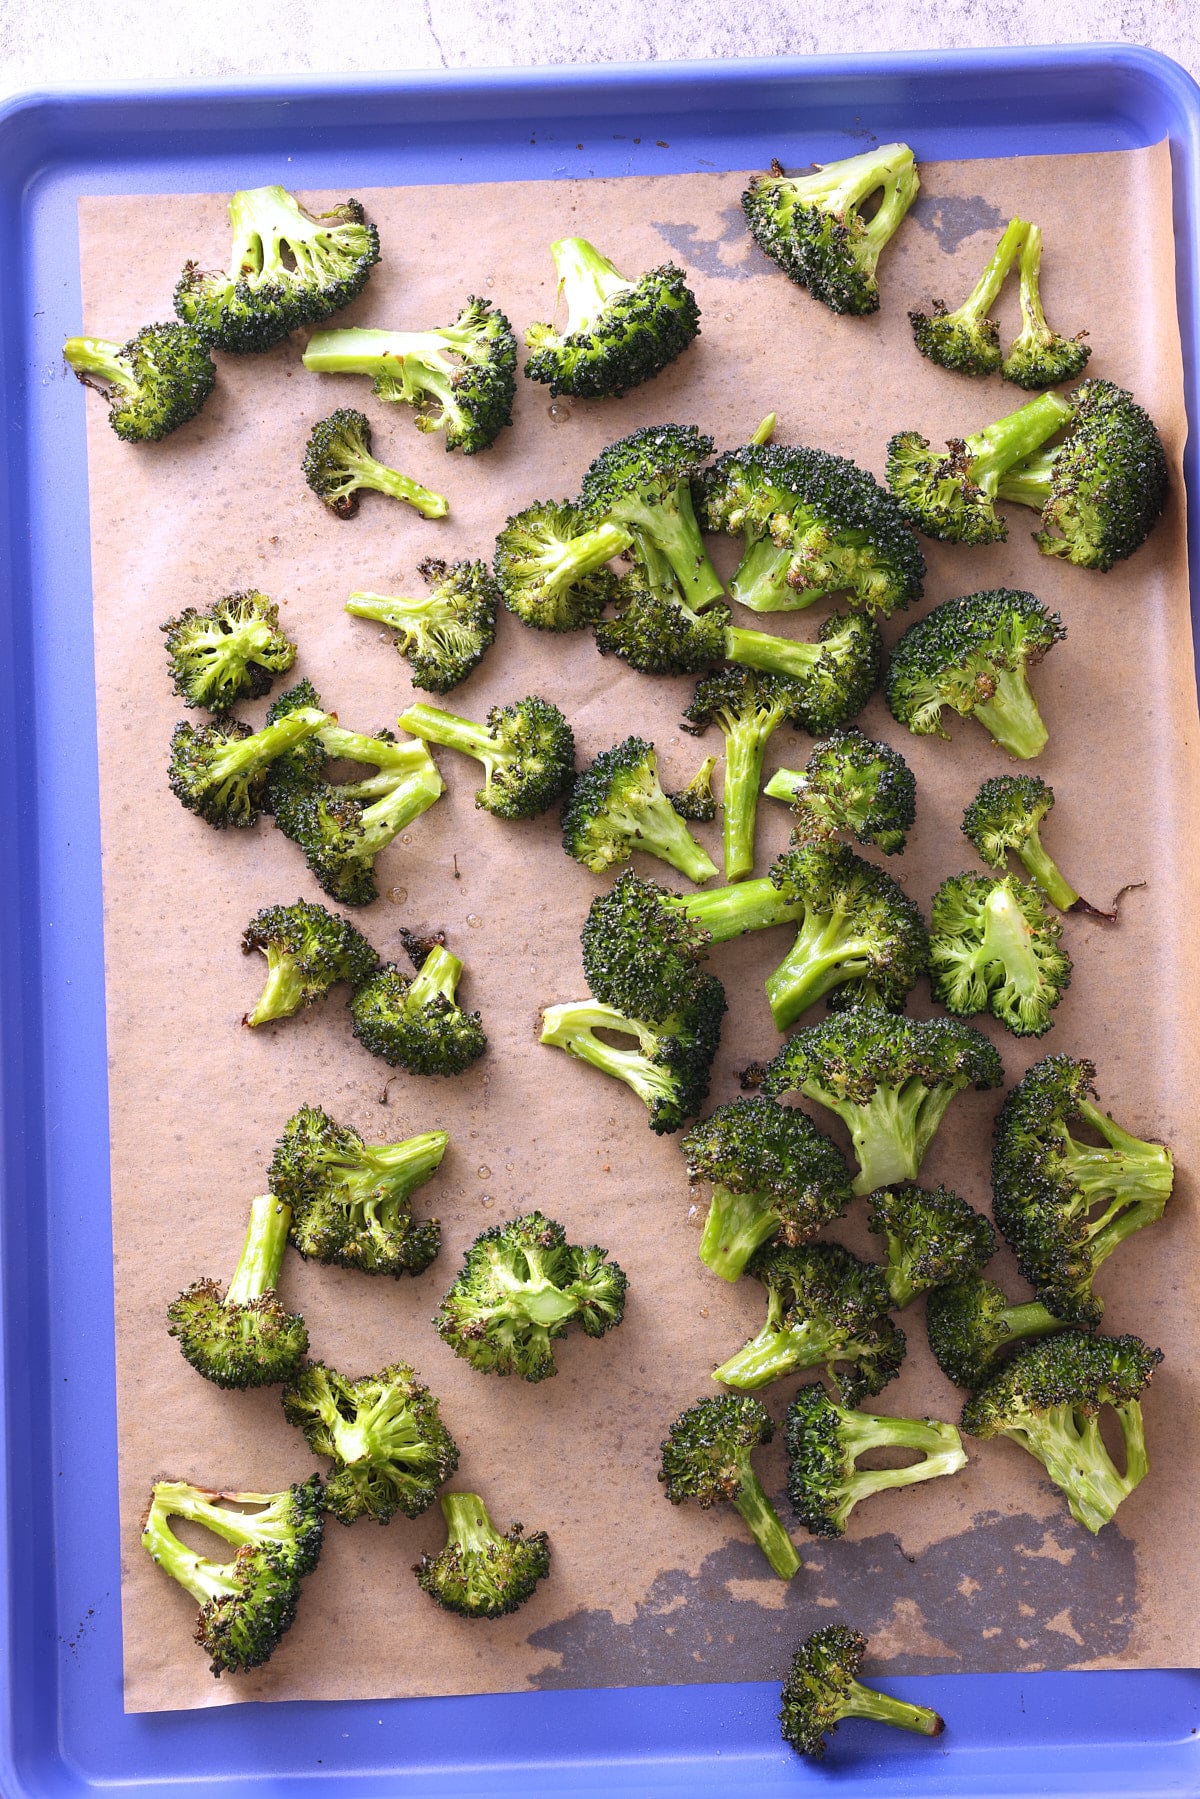 oven roasted broccoli florets on a baking sheet